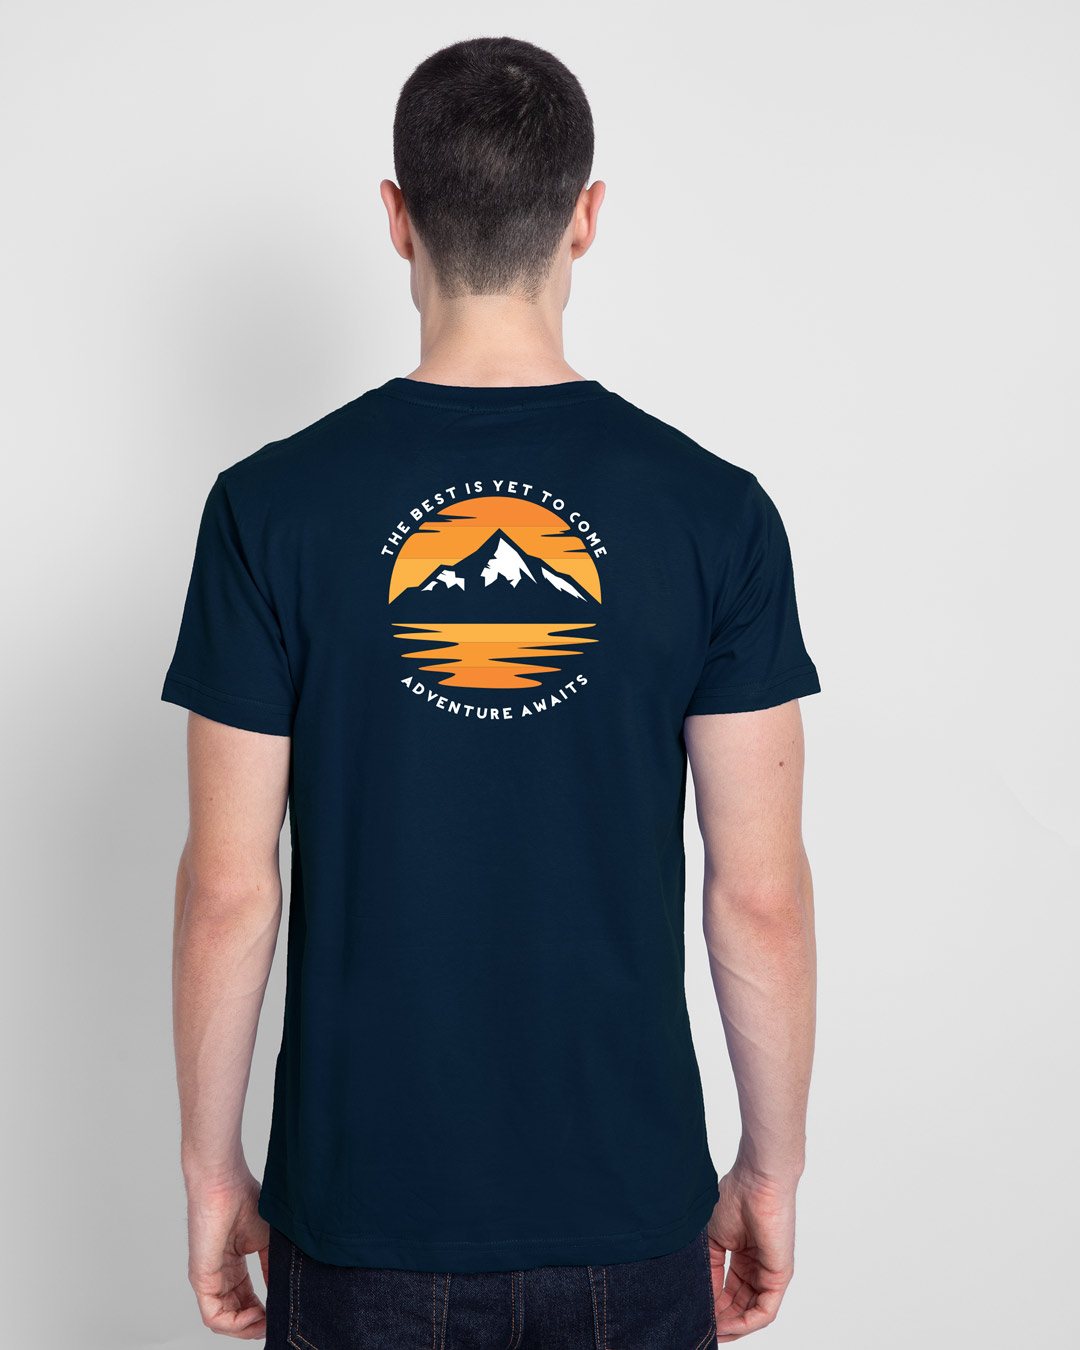 Shop The Best is Yet to Come  Half Sleeve T-shirt Navy Blue-Back